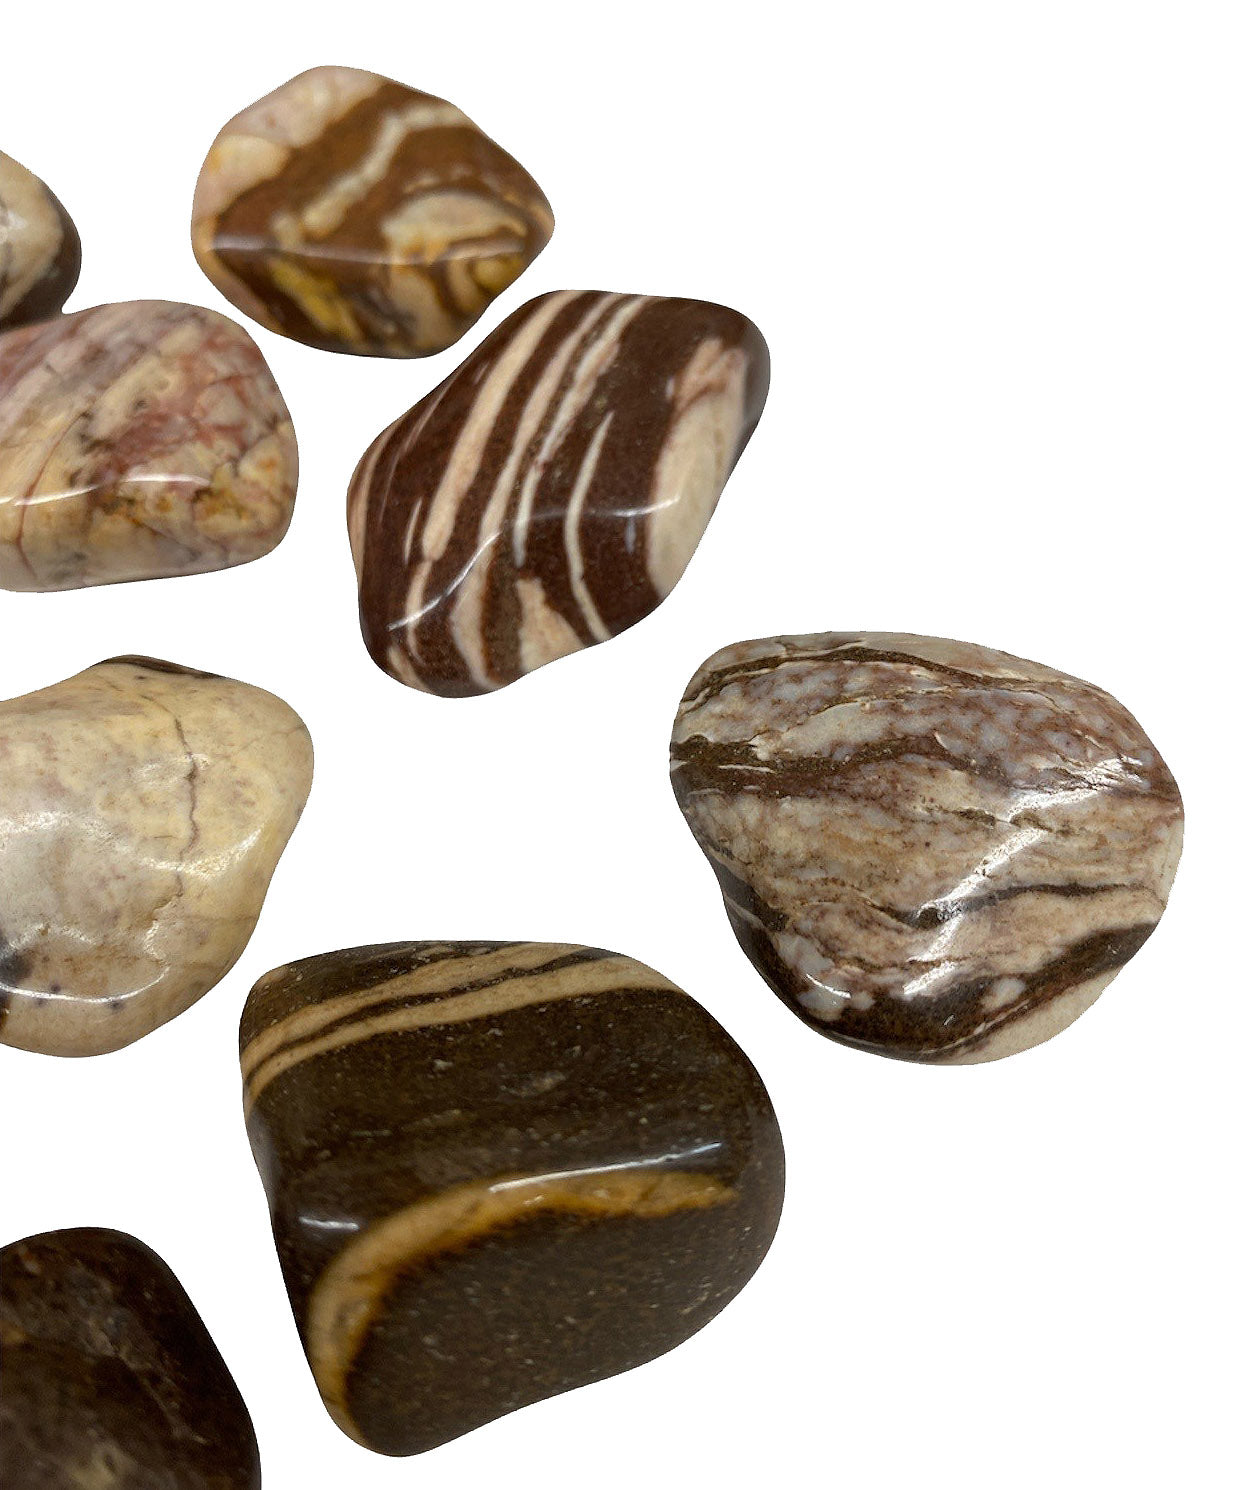 Zebra Jasper Tumbled Stones - Medium 30 - 40mm - 1 LB - Brazil - NEW122 - can help make a connection with mother earth and the infinite energy and love of the universe. It can also reveal your true nature and help see past illusions.